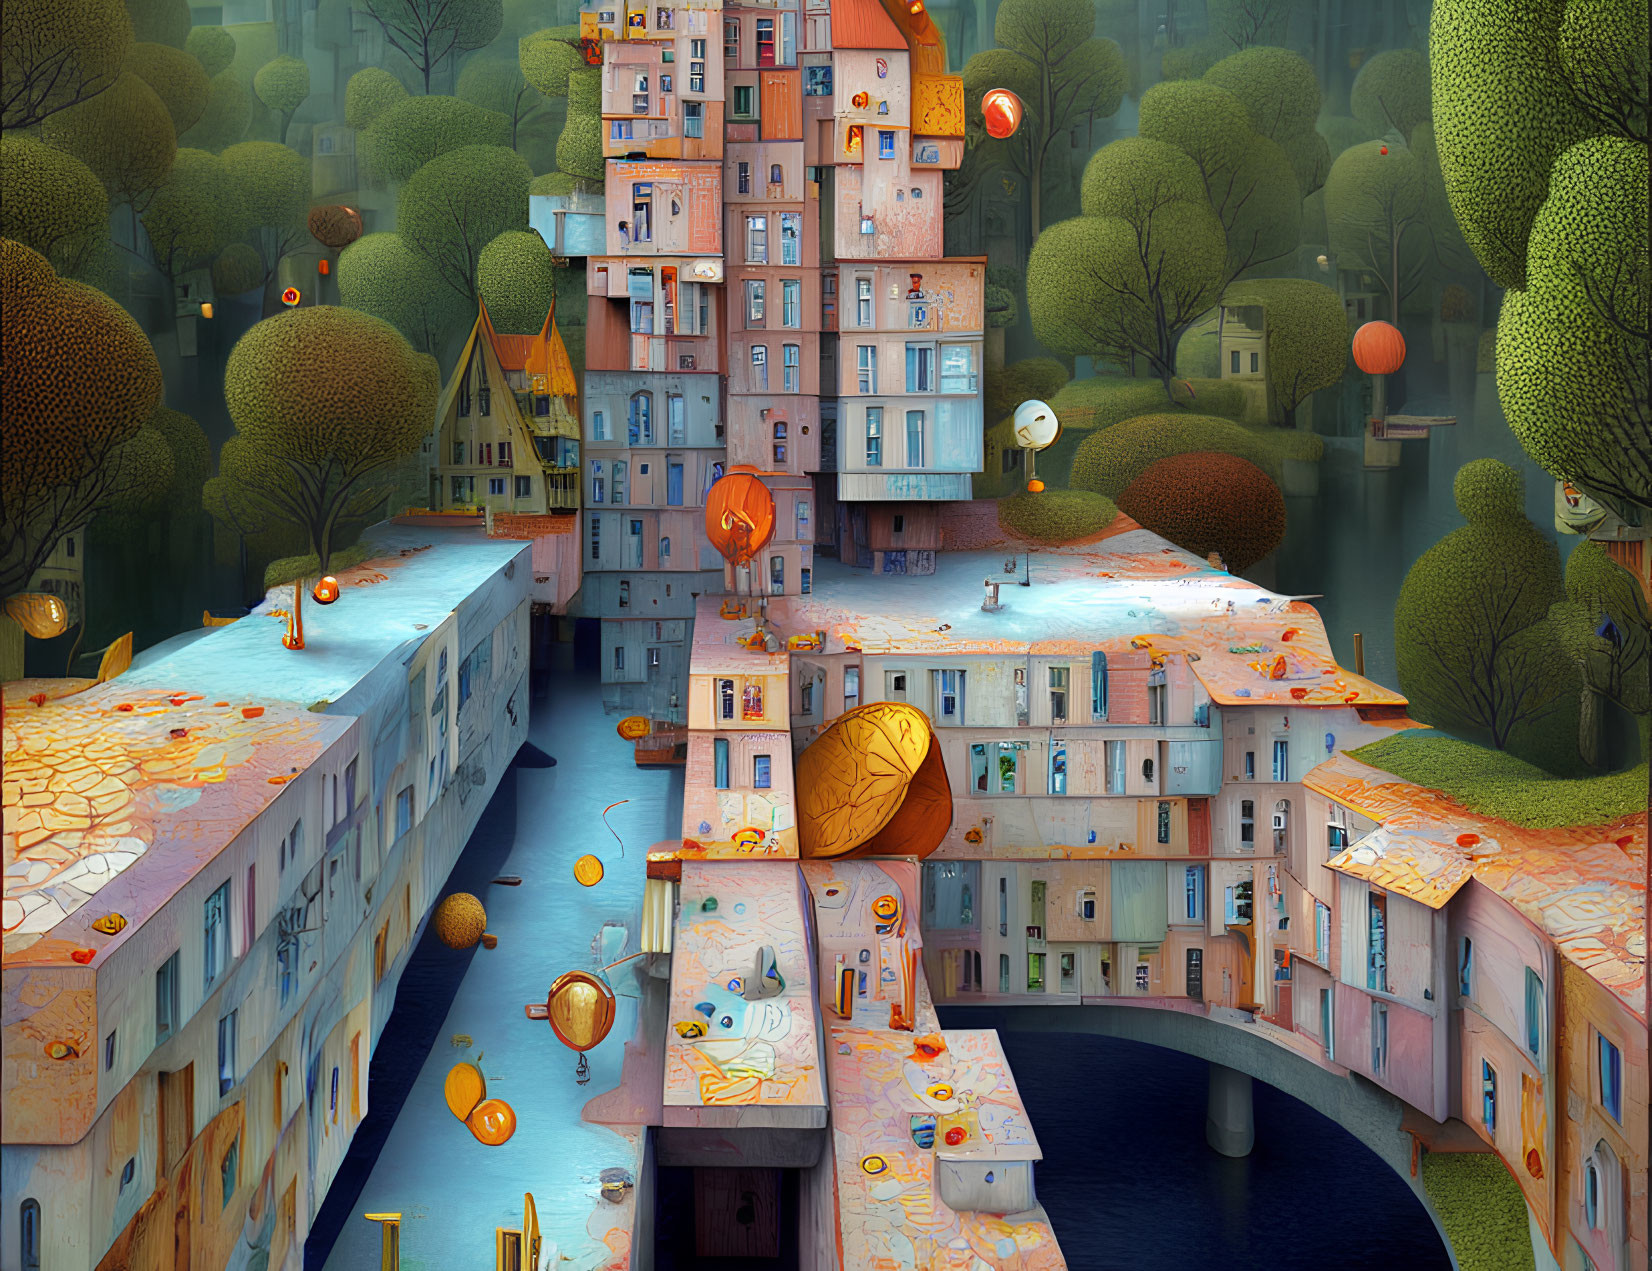 Intricate multi-story building in autumn landscape with floating orange orbs